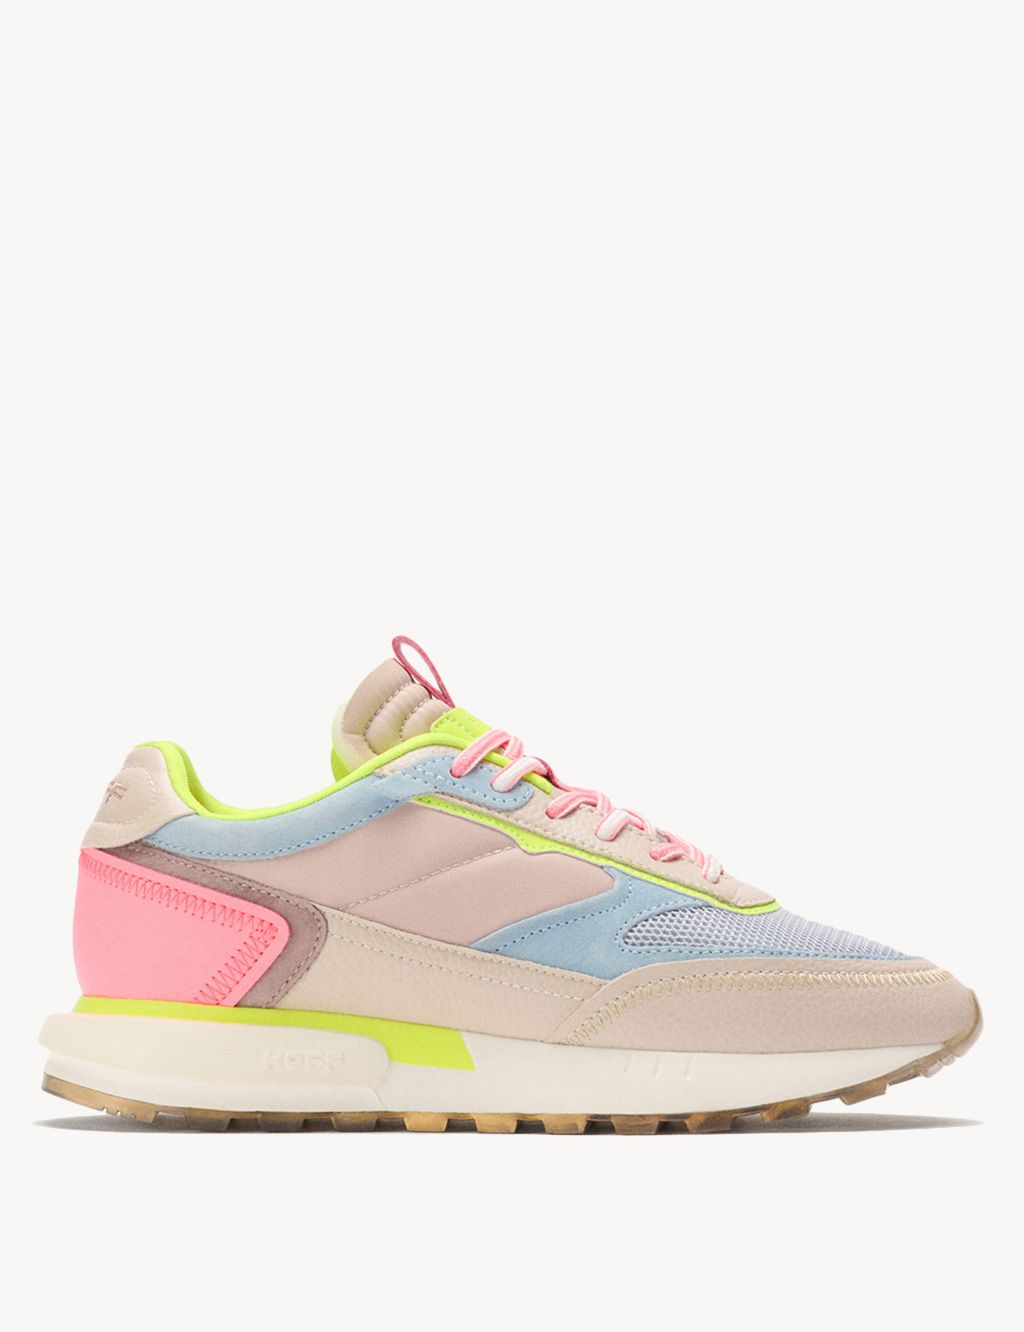 Tribe Trainers image 1